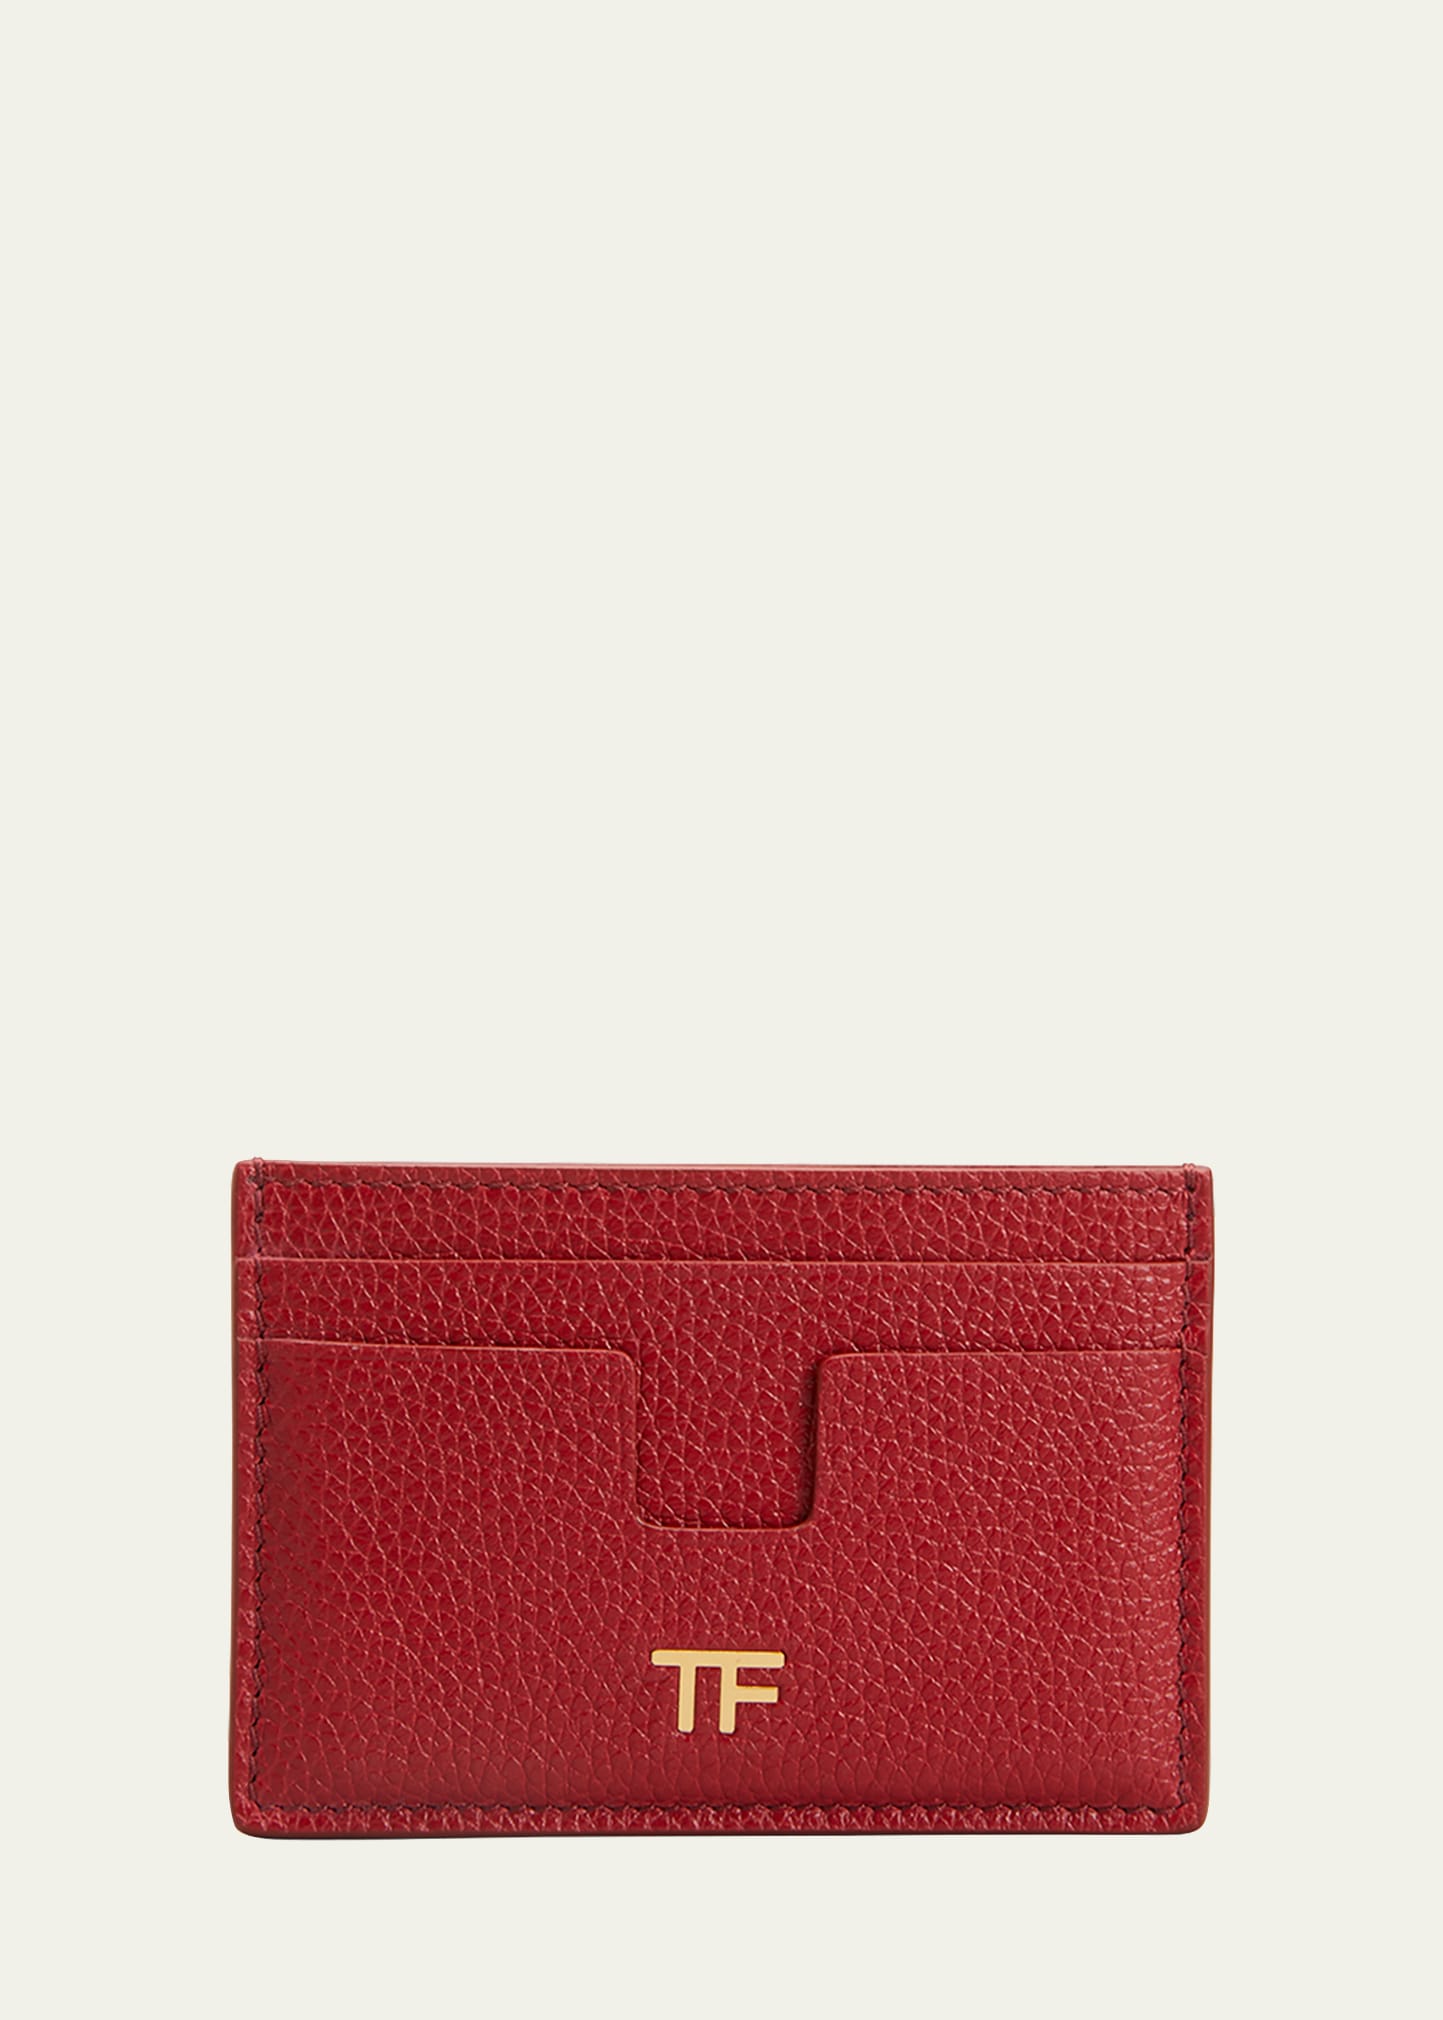 Tom Ford Classic Tf Leather Card Case In Jungle Red